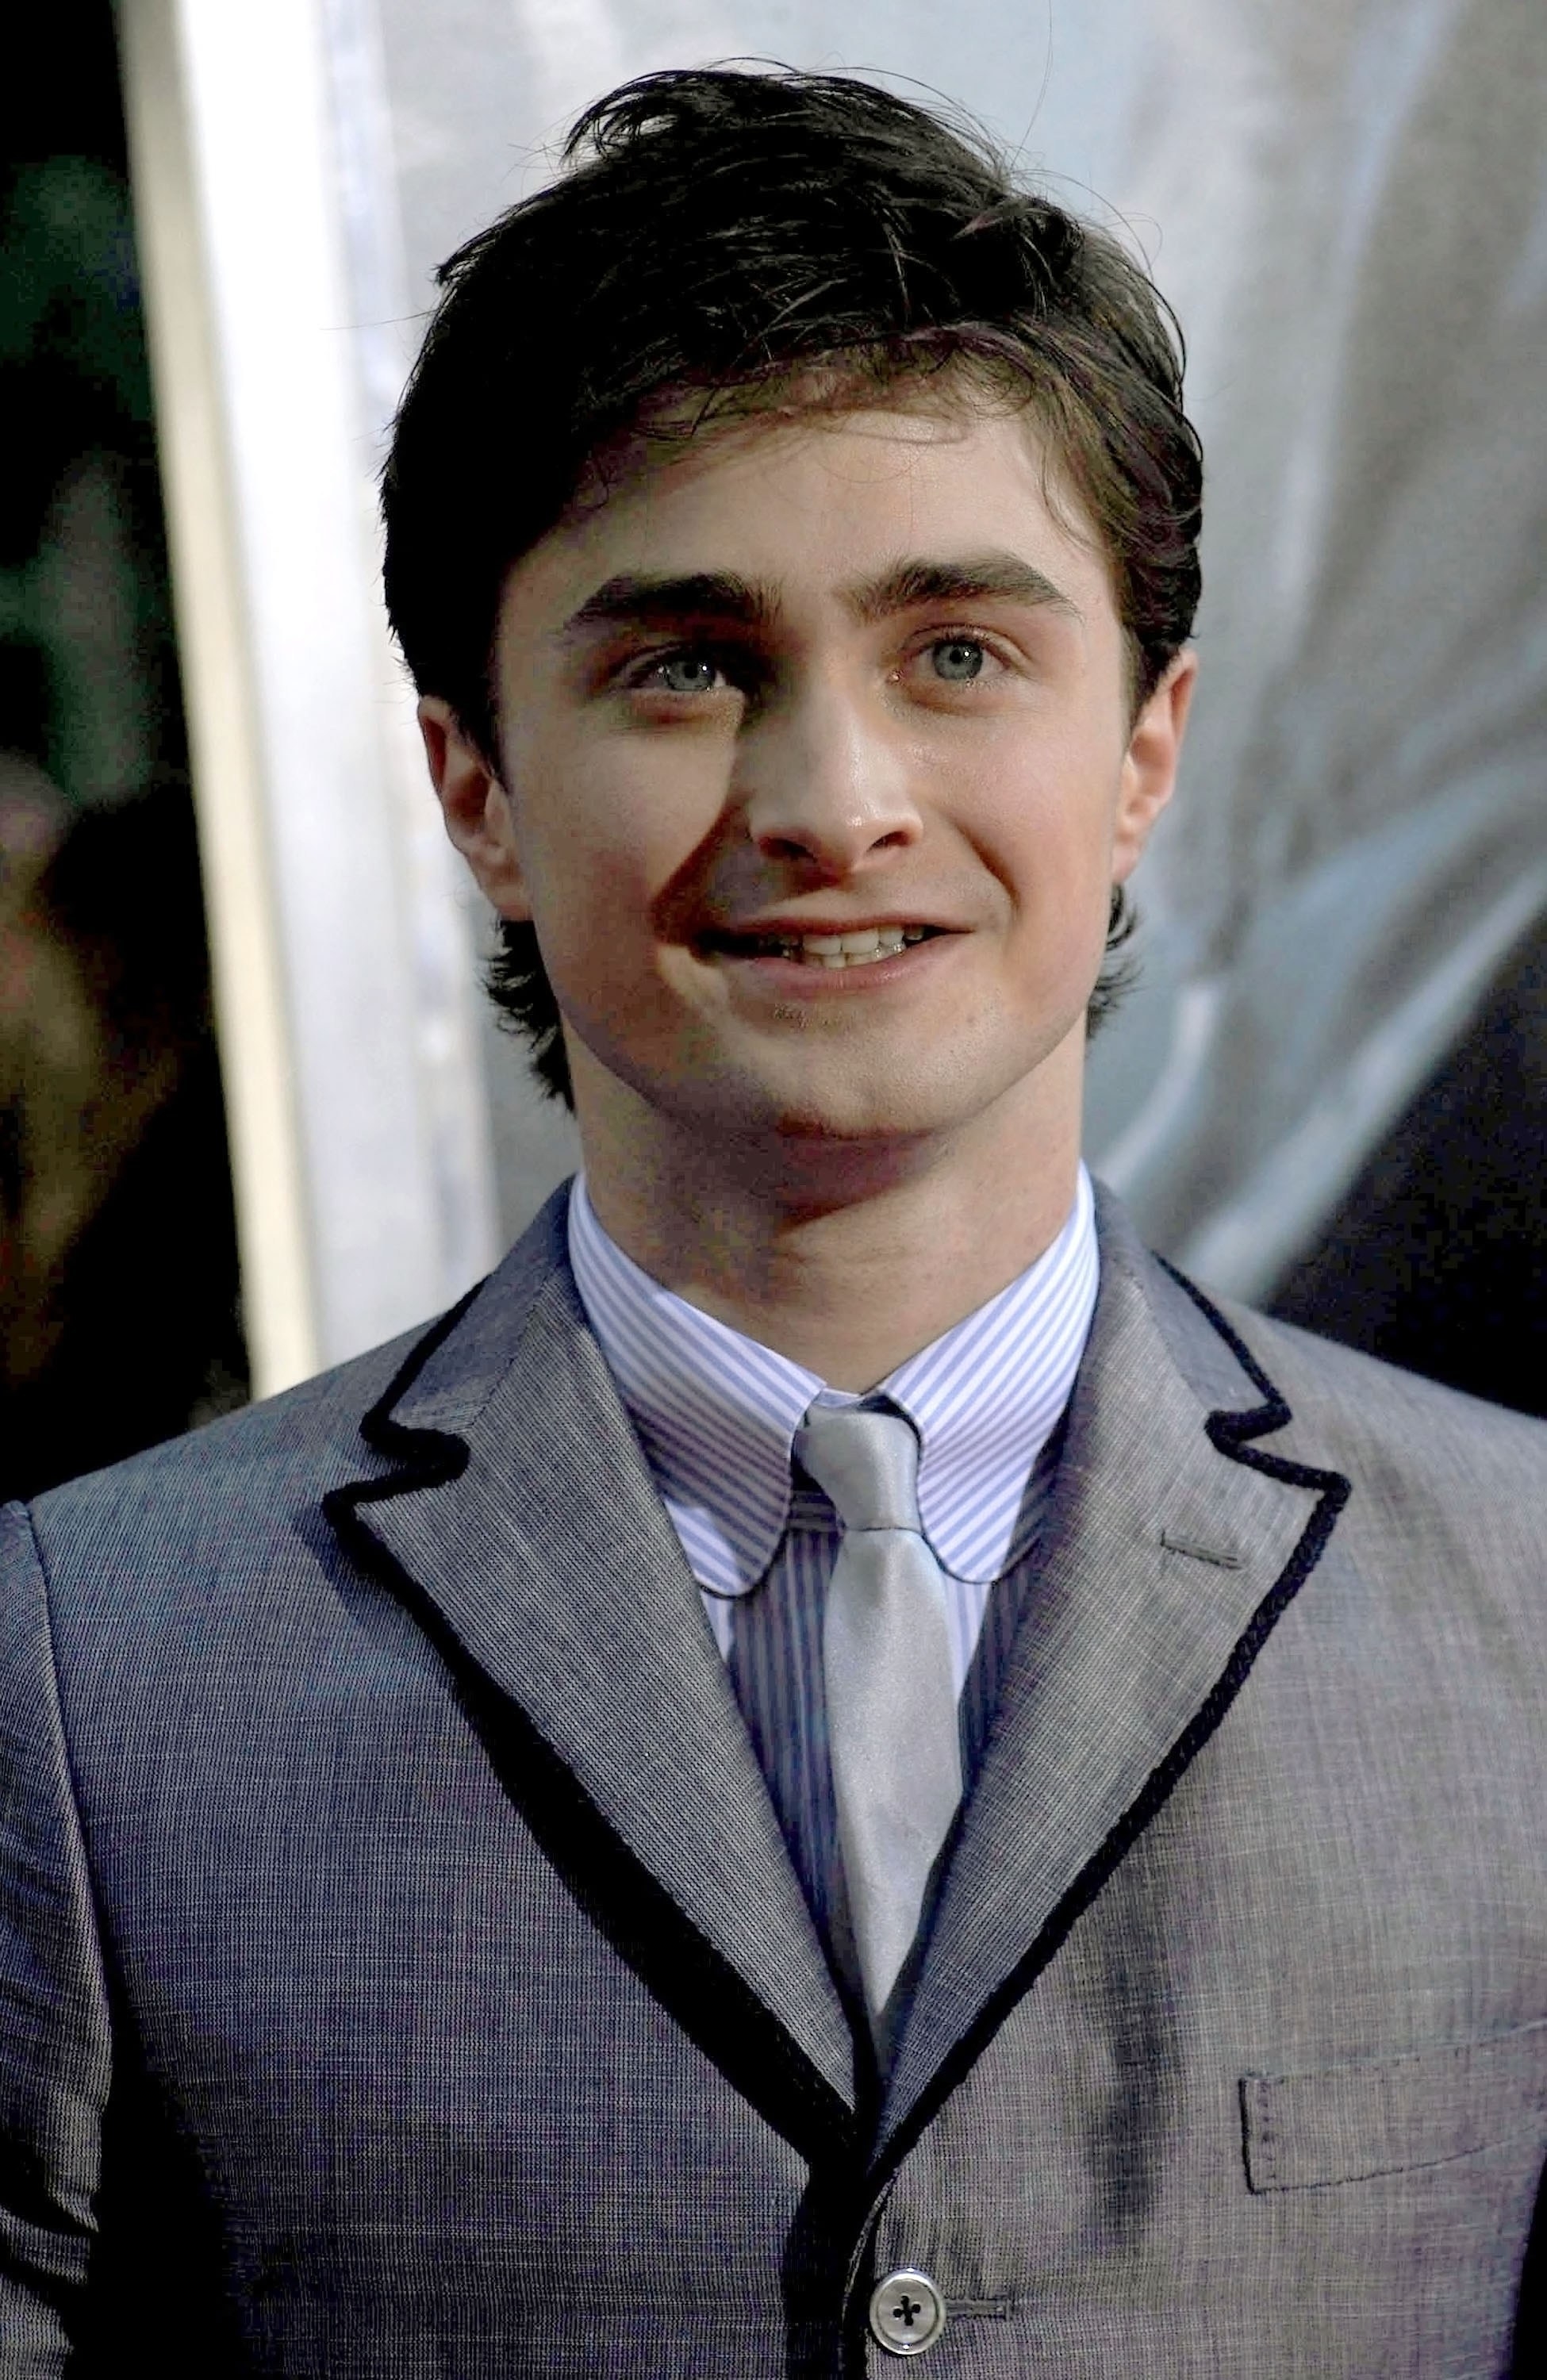 Radcliffe at the premiere for the sixth film